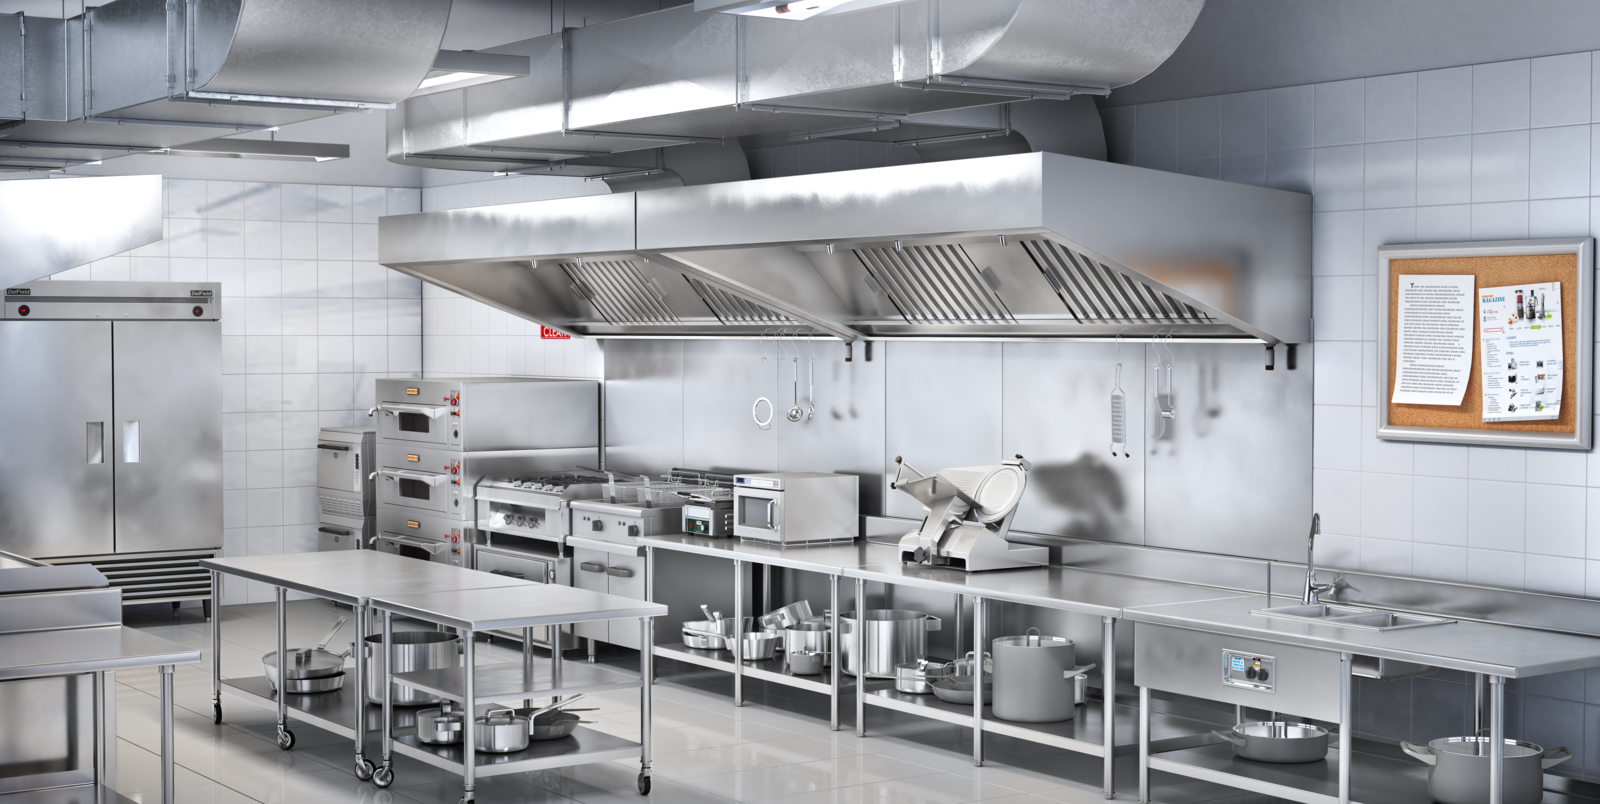 Trion® Kitchen Exhaust products